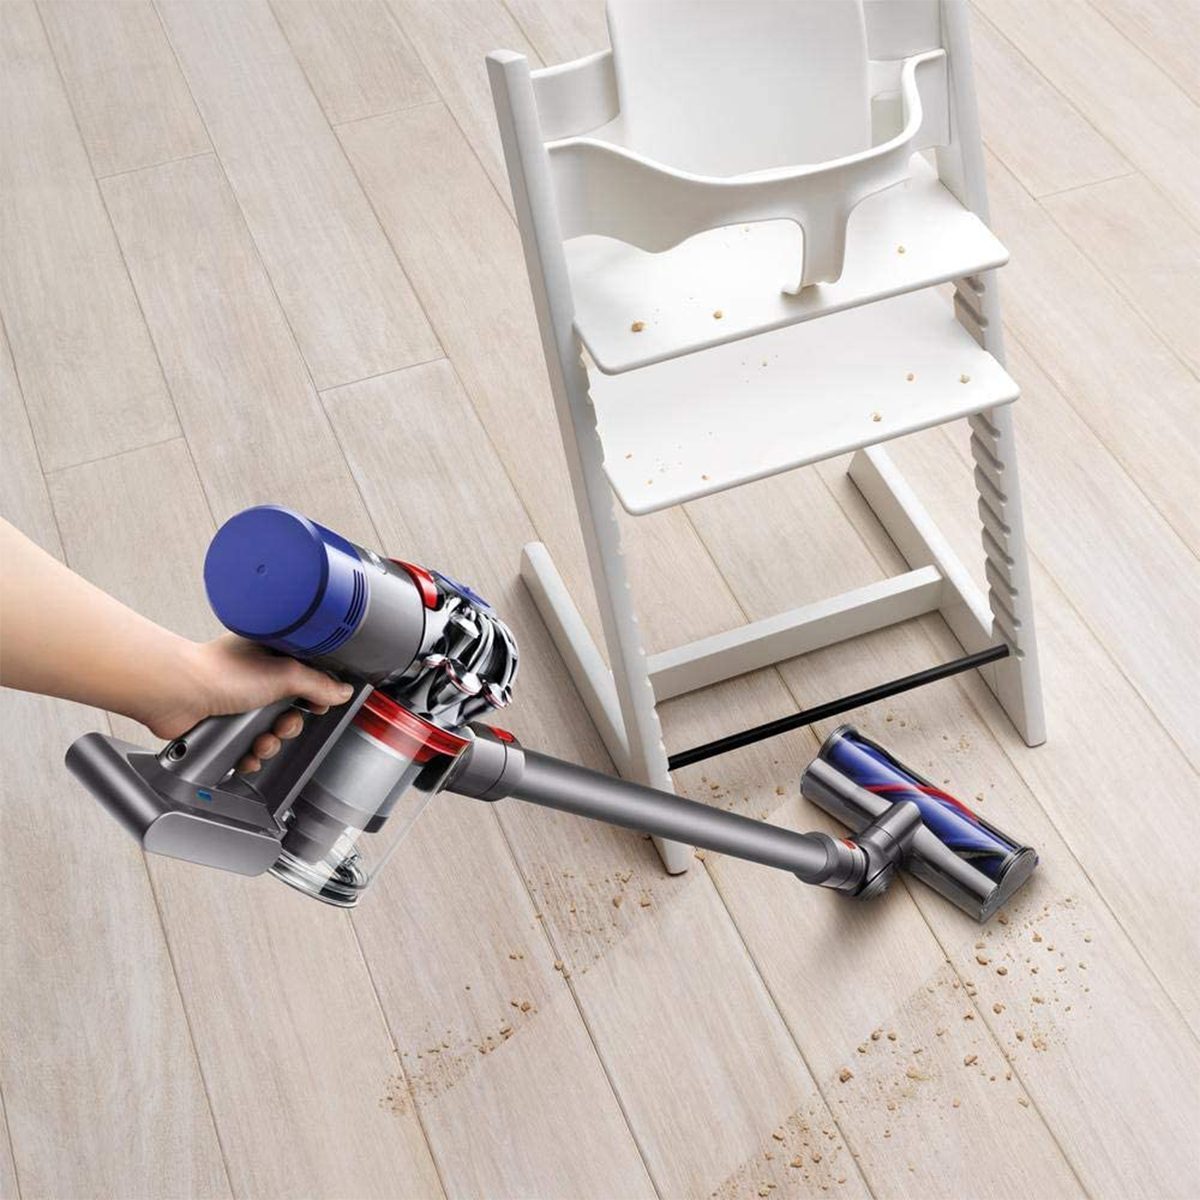 The 7 Best Vacuum Mop Combos Tested in 2023 - Bob Vila